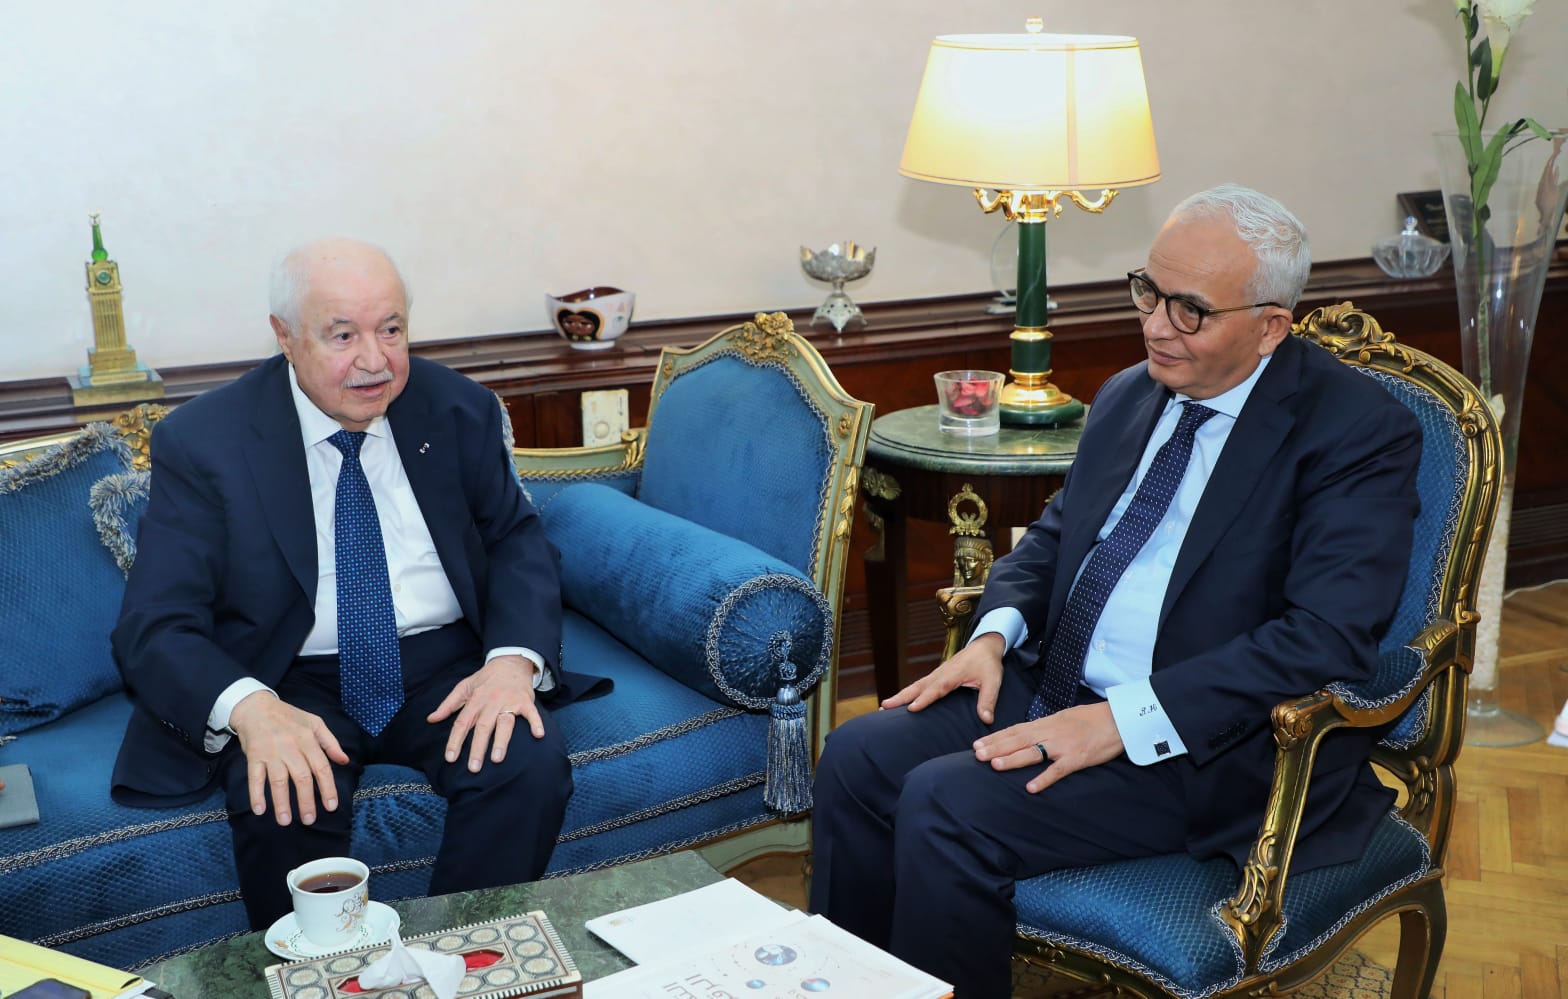 Dr. Abu-Ghazaleh and Egypt’s Minister of Education Discuss Cooperation